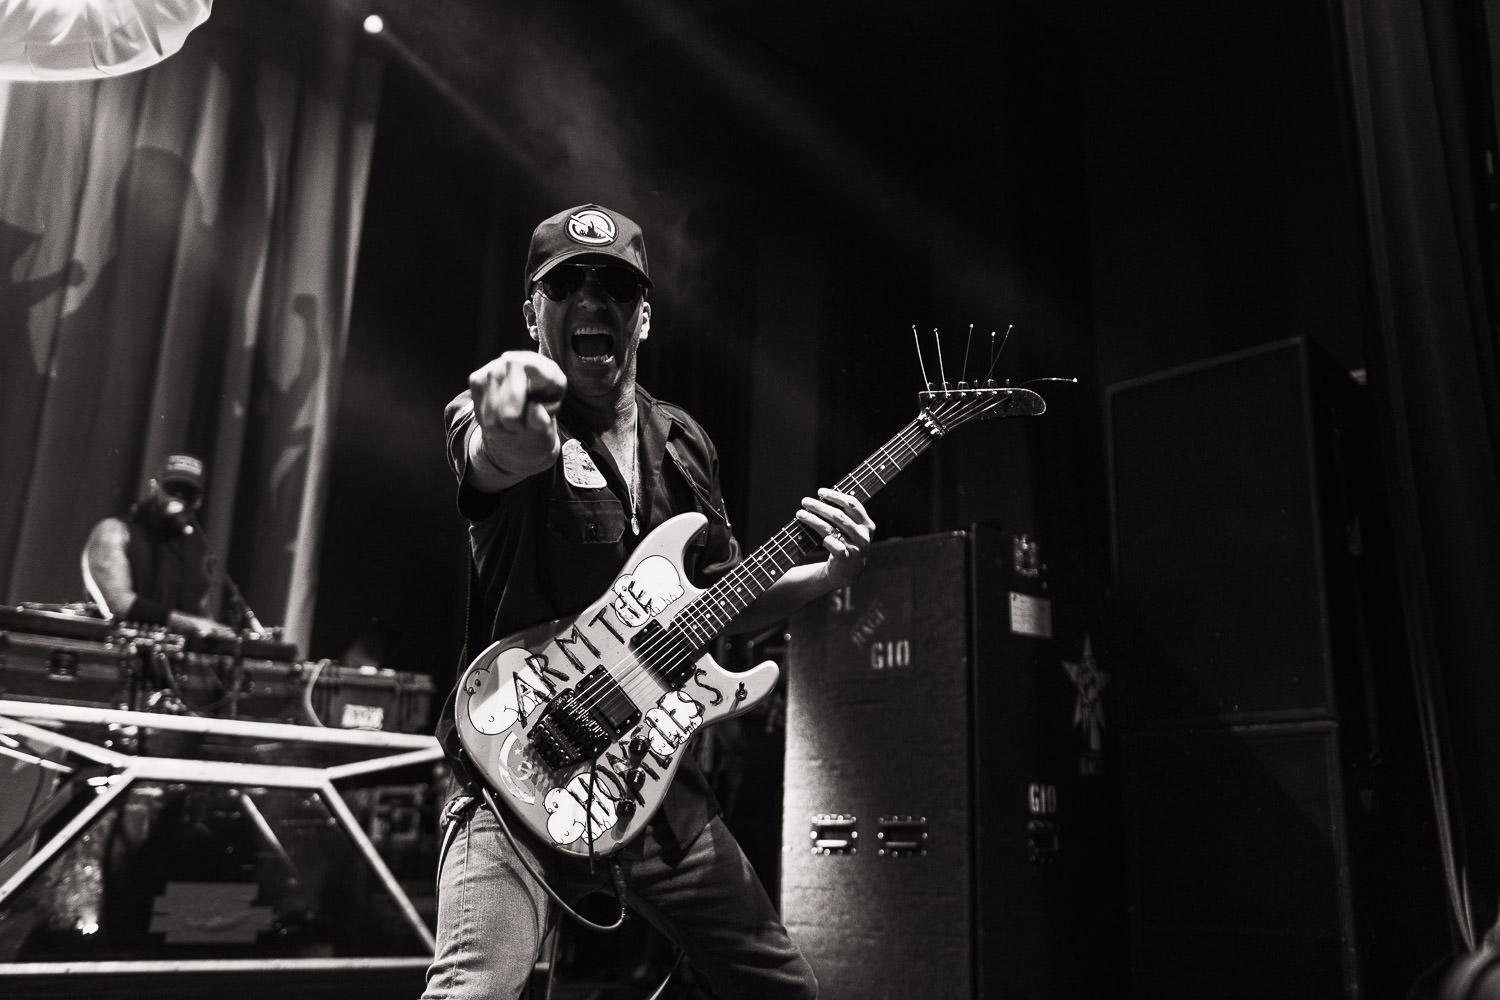 Tom Morello playing the Arm the Homeless guitar with Prophets of Rage, and pointing at the photographer Tracy.